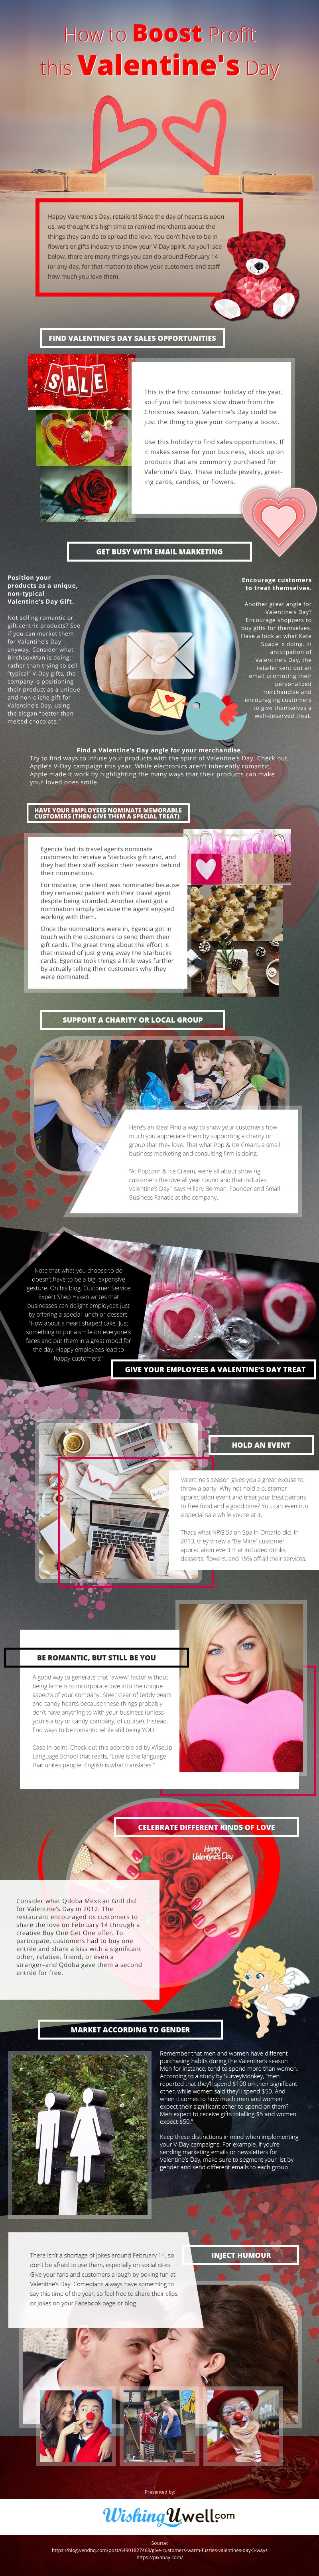 How-to-Boost-Profit-this-Valentines-Day Infographic